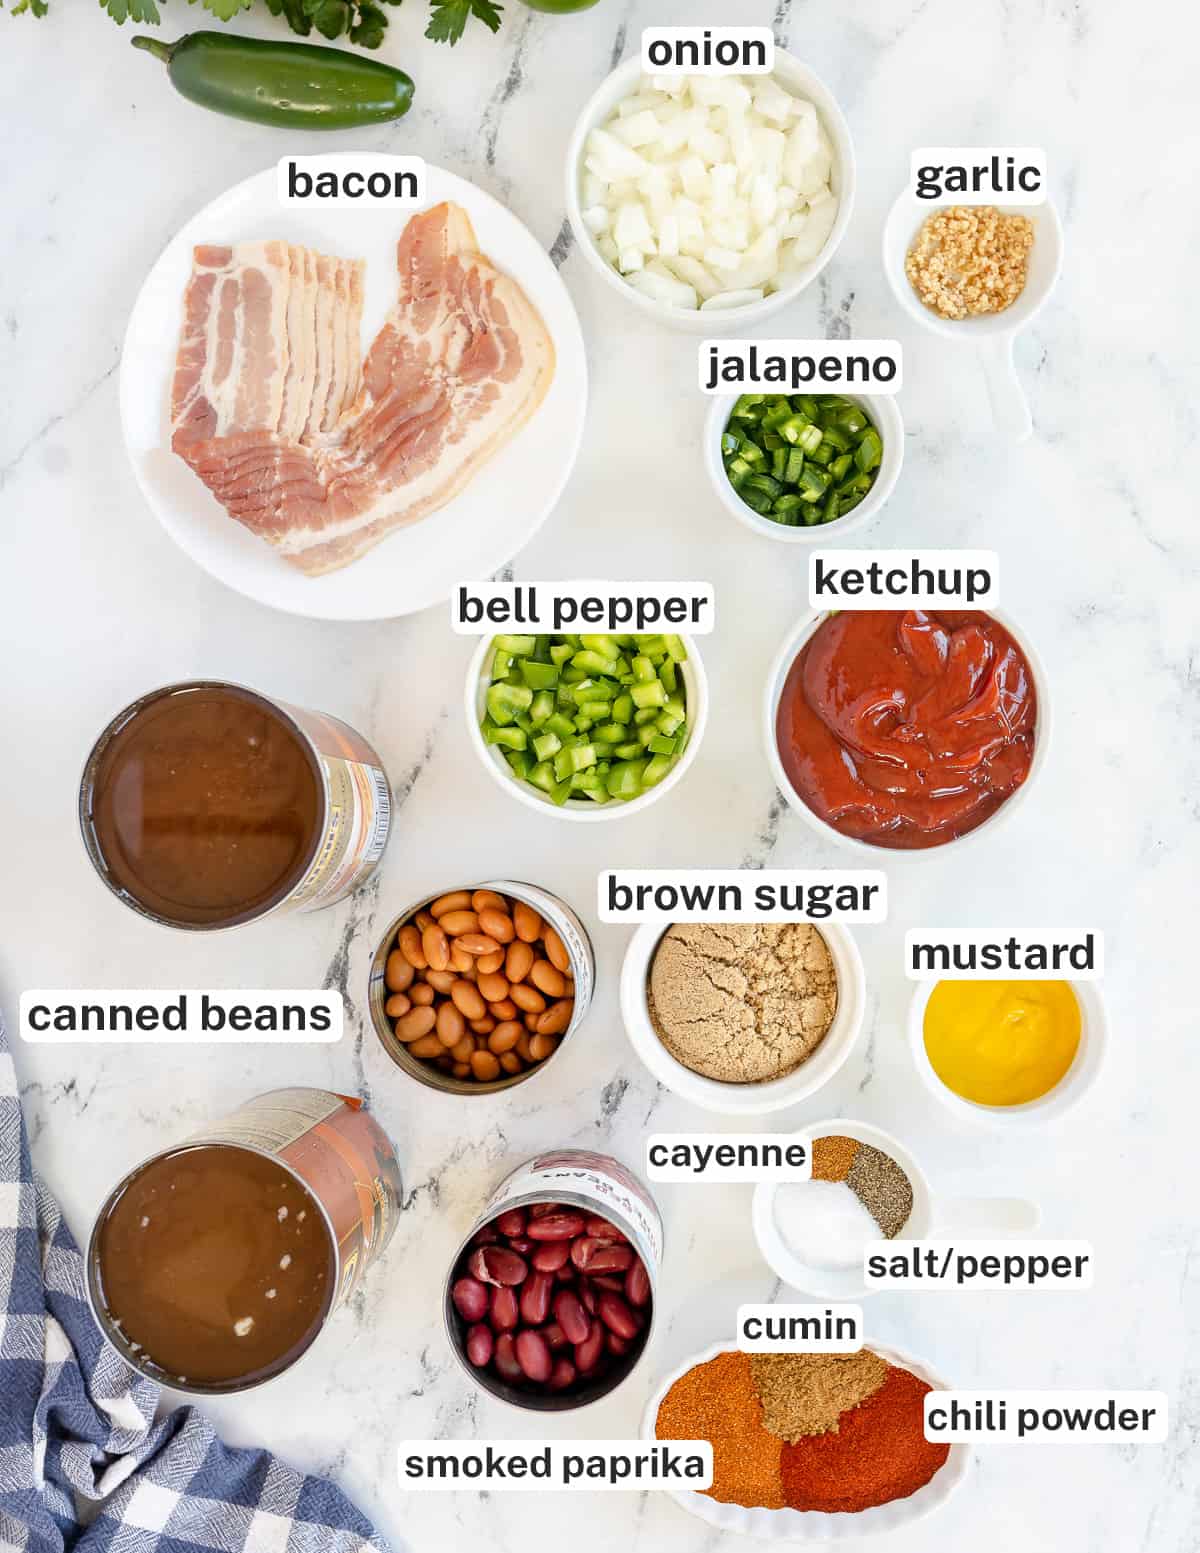 The ingredients for Spicy Baked Beans with text.